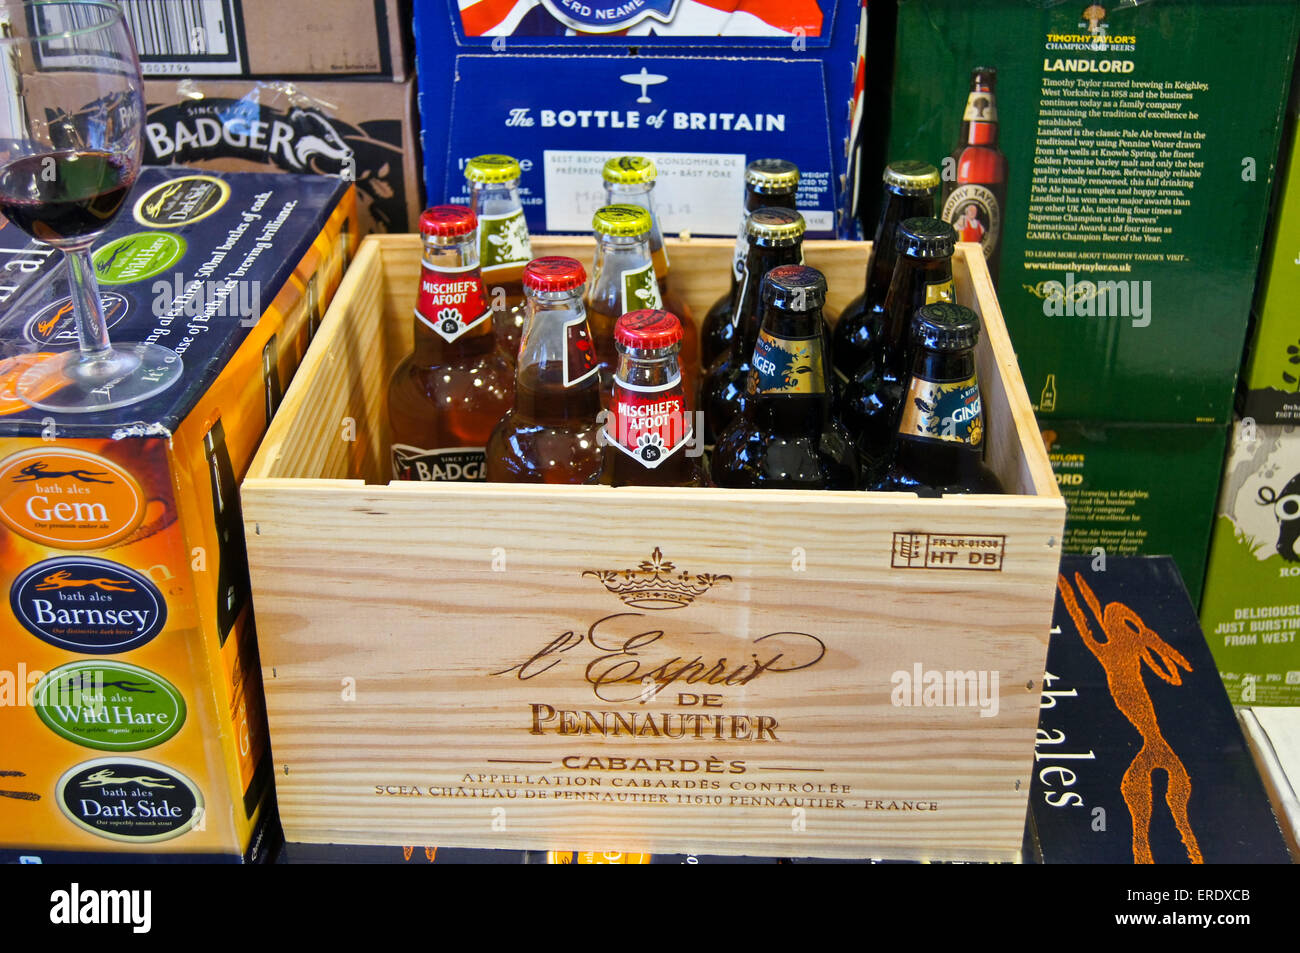 Cases of beer and bottles in a Cabardès wine case at a Majestic wine warehouse, Wanstead, London Stock Photo